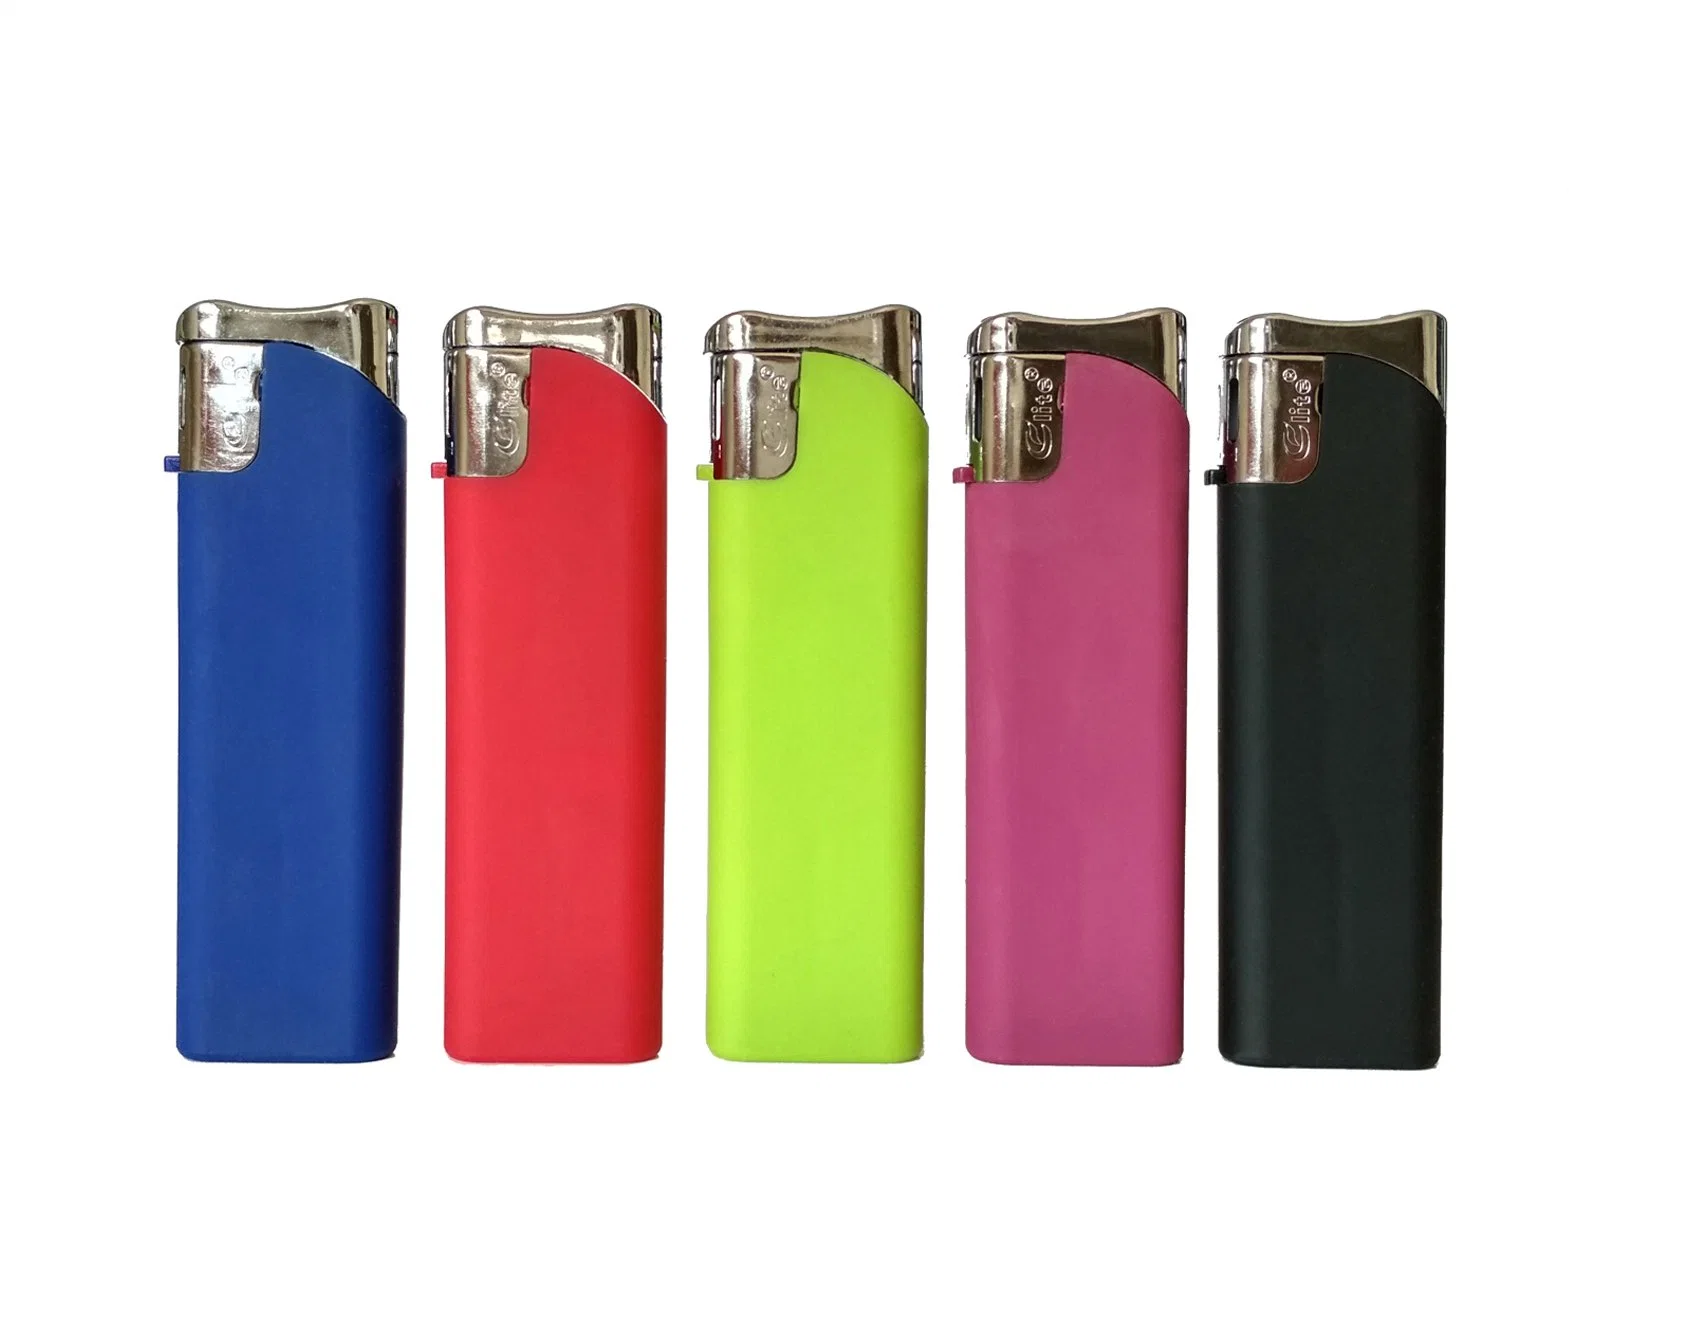 Refillable Plastic Electronic Gas Lighter Fh-805